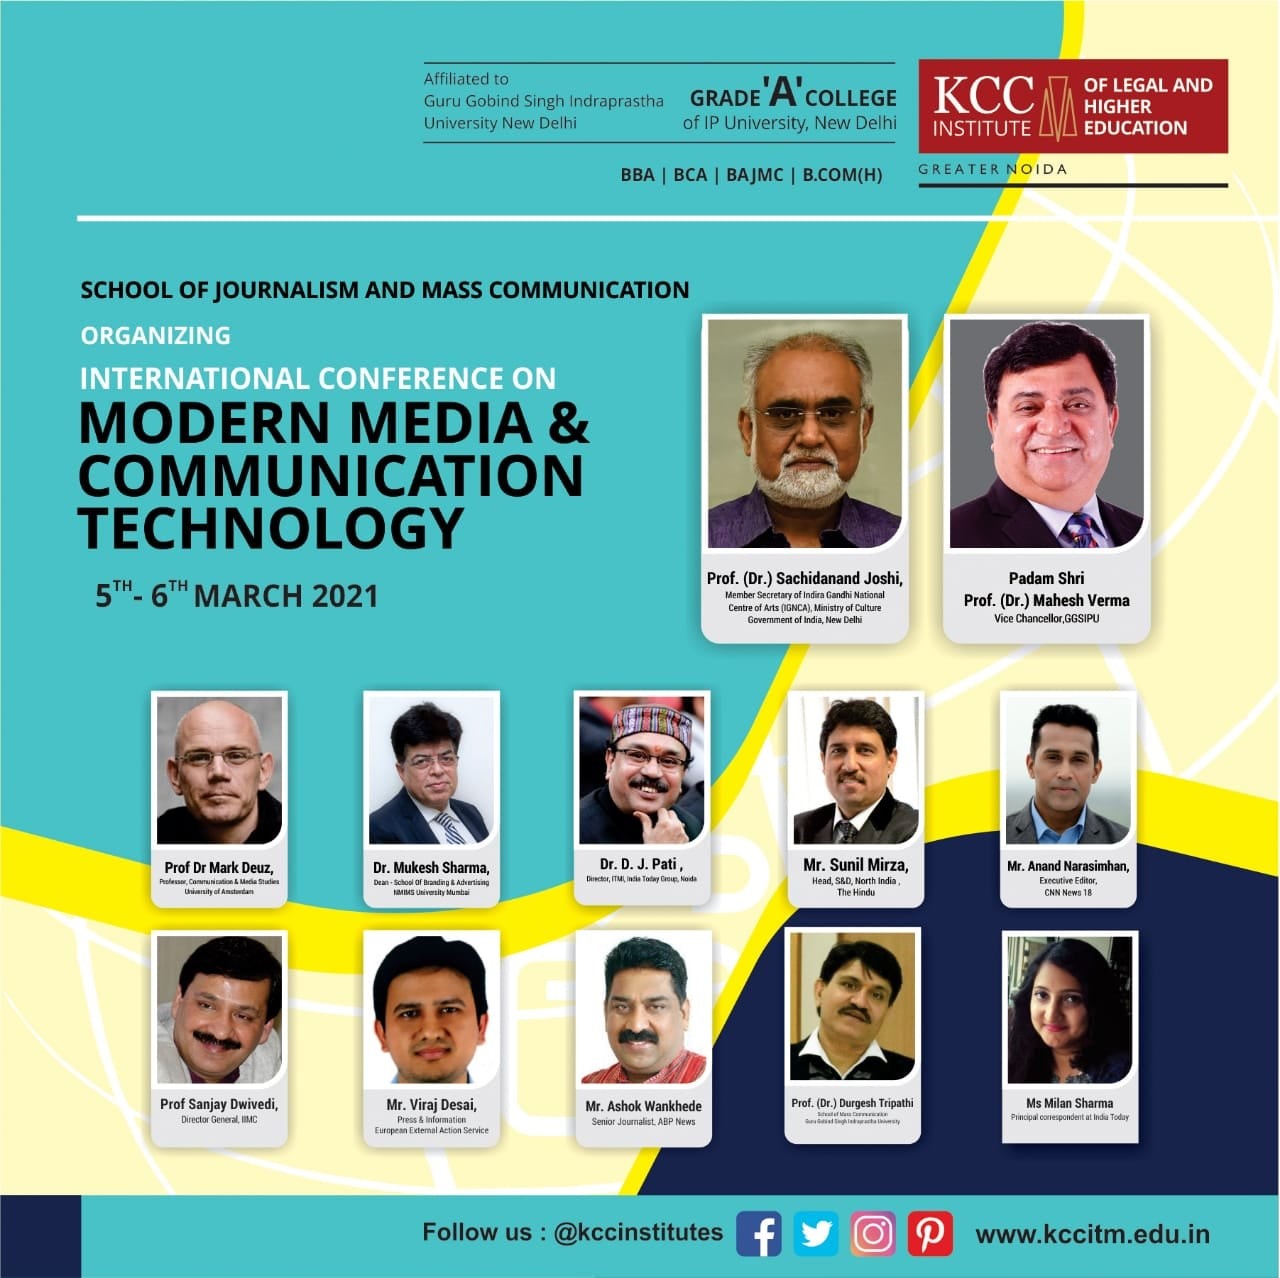 School of Journalism and Mass Communication, KCC Institute of Legal and Higher Education, Delhi NCR Greater Noida Is Organizing International Conference On "Modern Media & Communication Technology" On 5th and 6th March 2021.